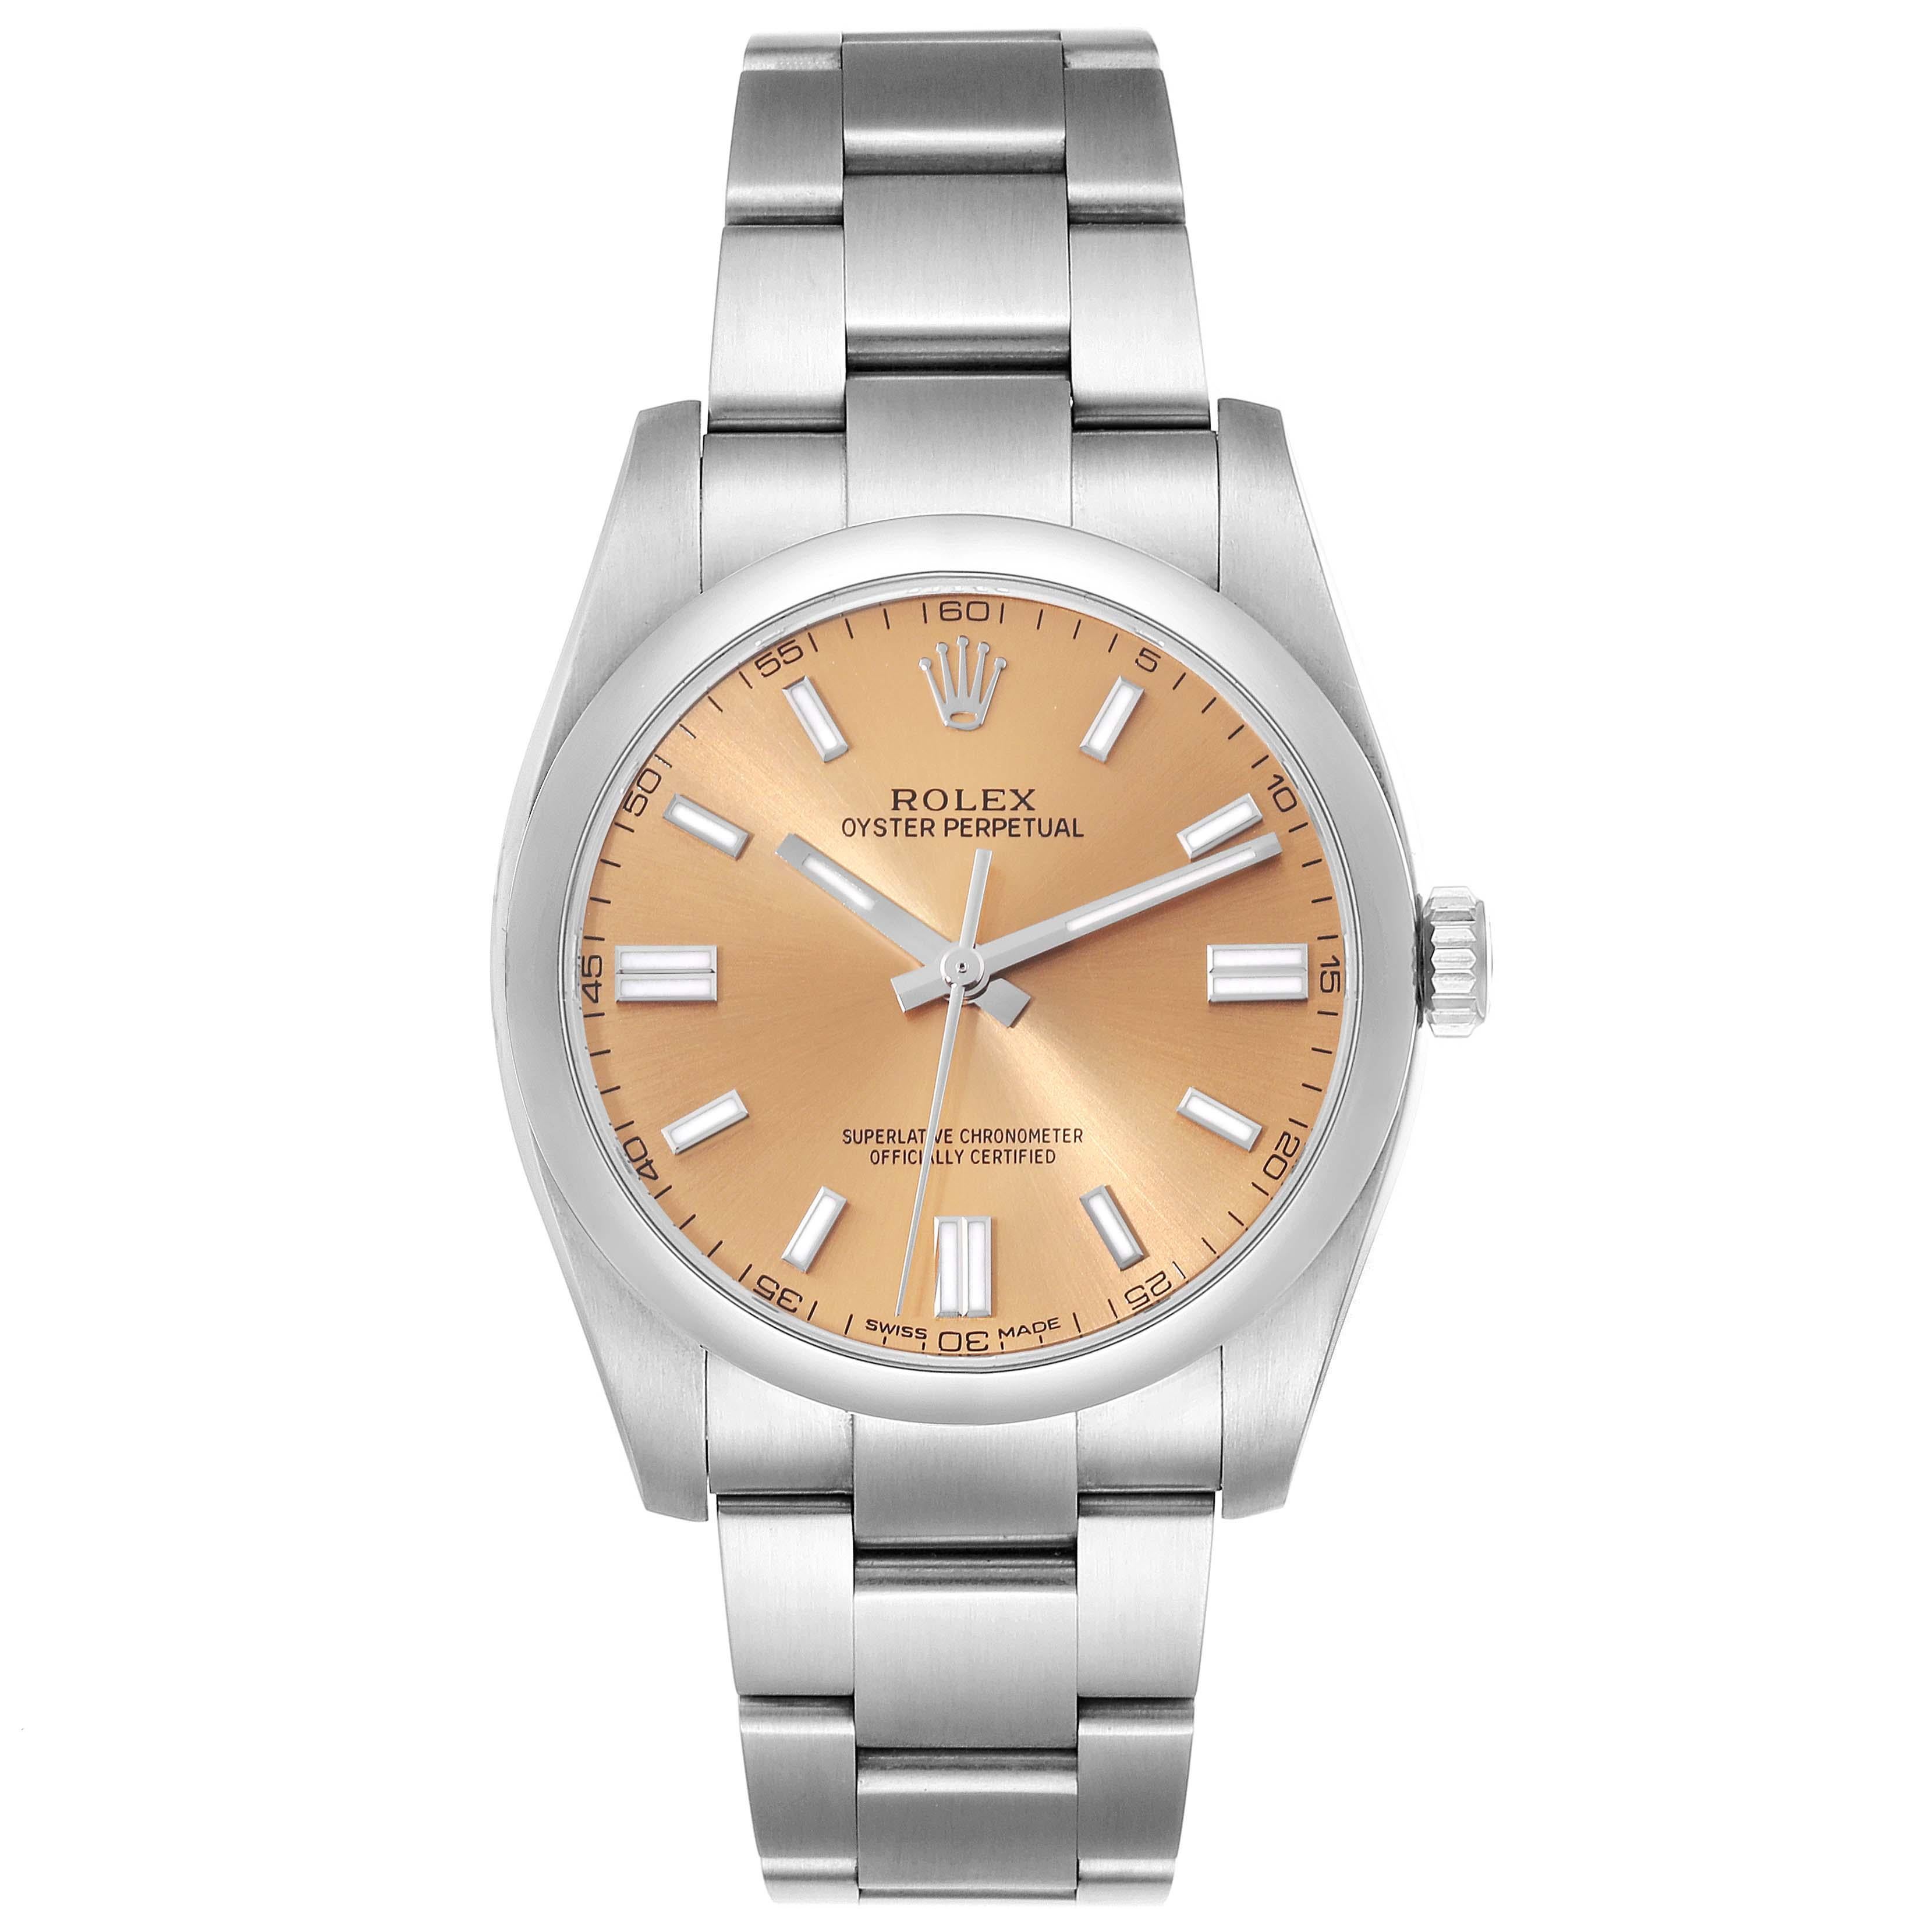 Rolex Oyster Perpetual 36 White Grape Dial Steel Mens Watch 116000 Box Card For Sale 5